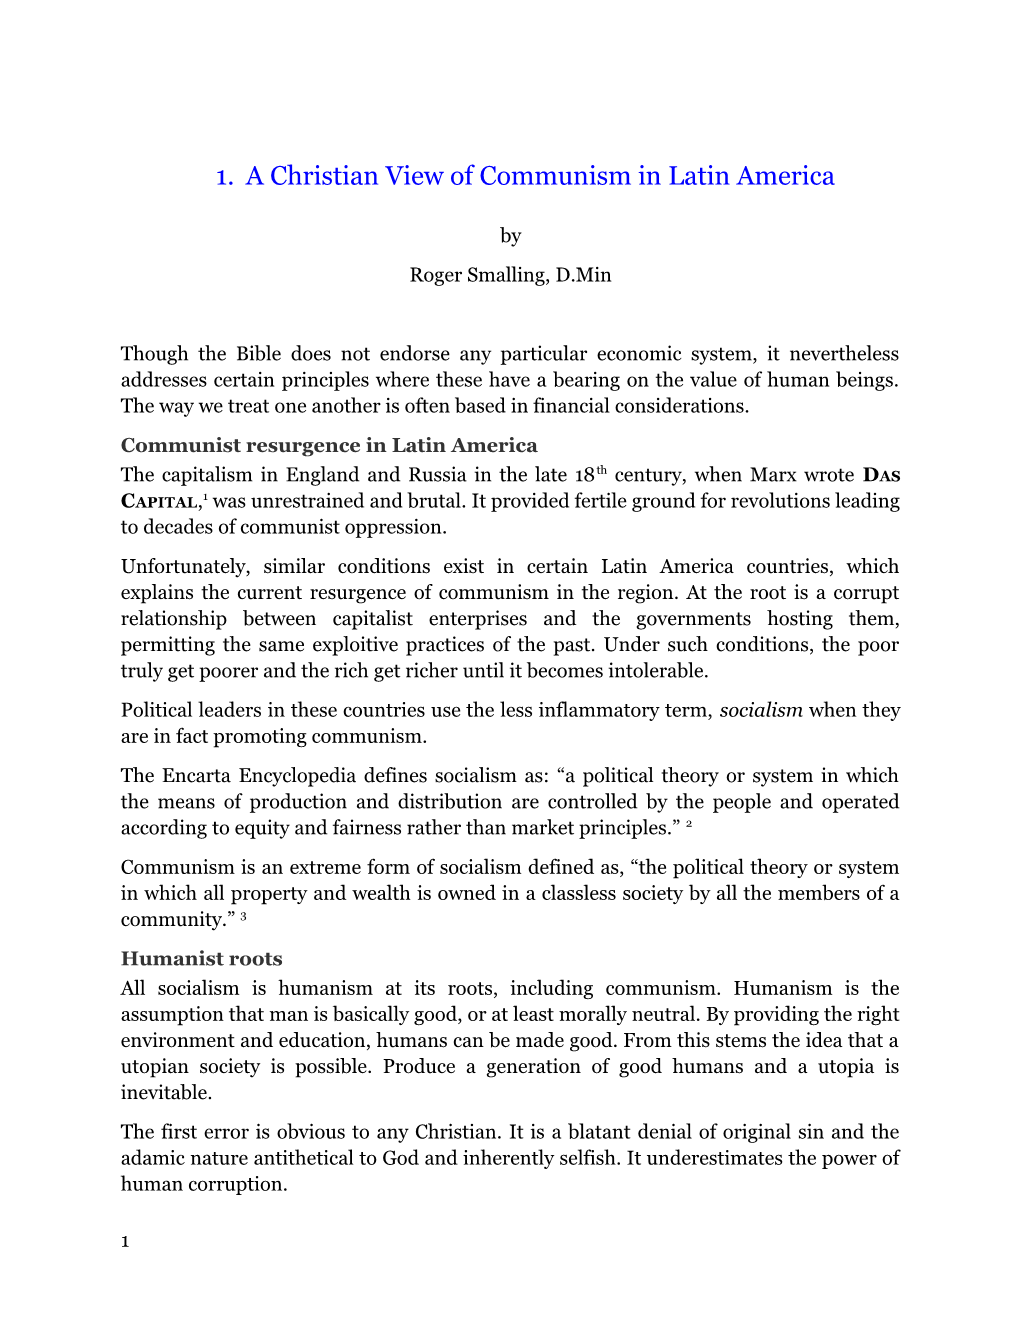 A Christian View of Communism in Latin America